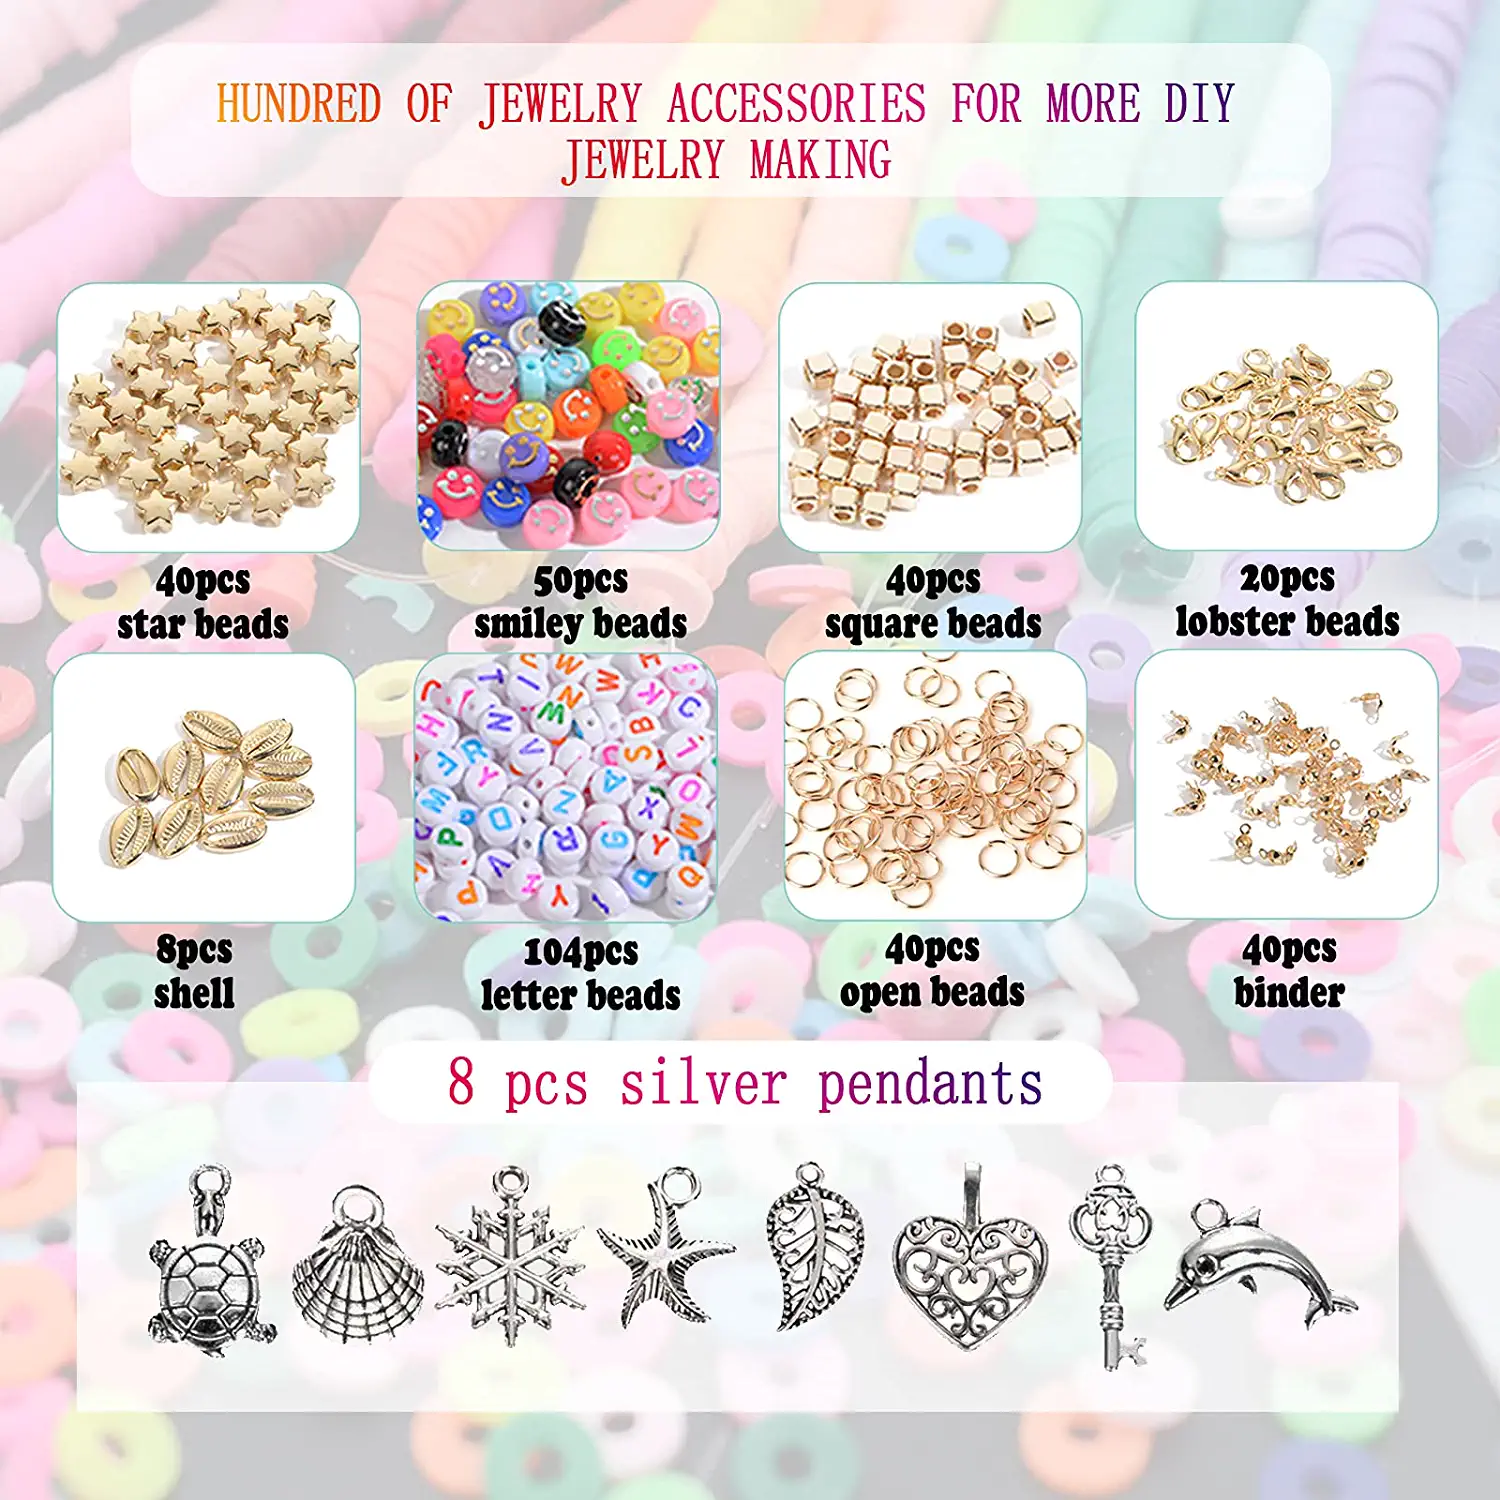 4900 Pcs Clay Beads for Bracelets Making Kit, Flat Round Polymer Clay Beads  for Jewelry Making Kit with Letter Beads and Smiley Face Beads for  Bracelets Beads w…